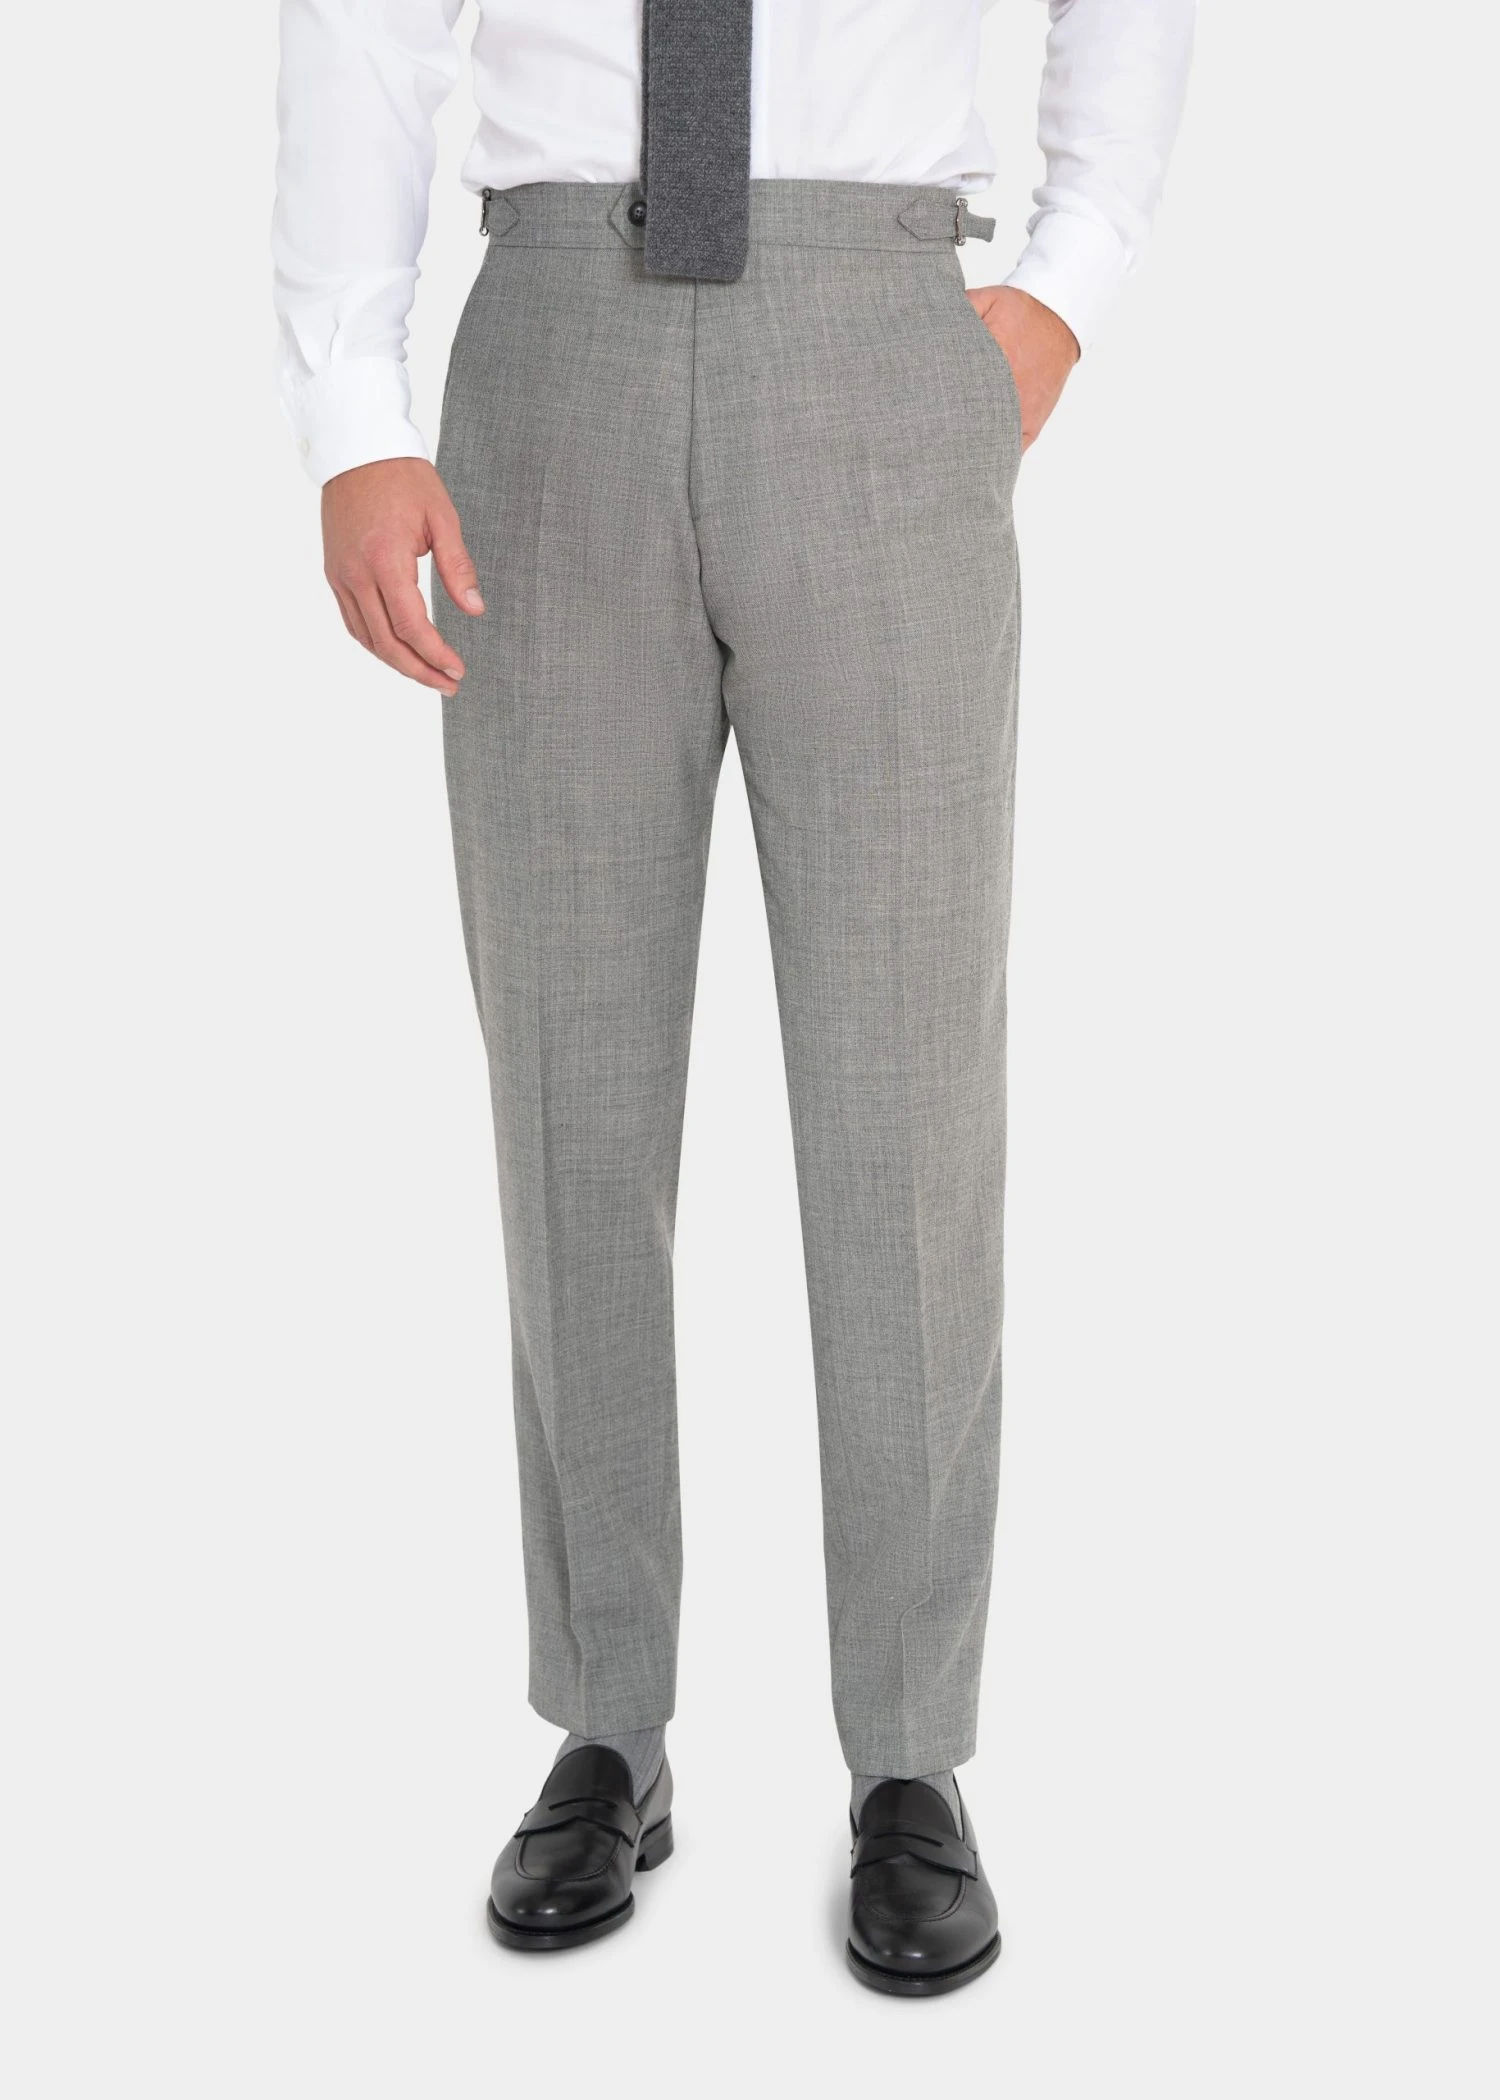 light grey suit trousers in twistair fabric